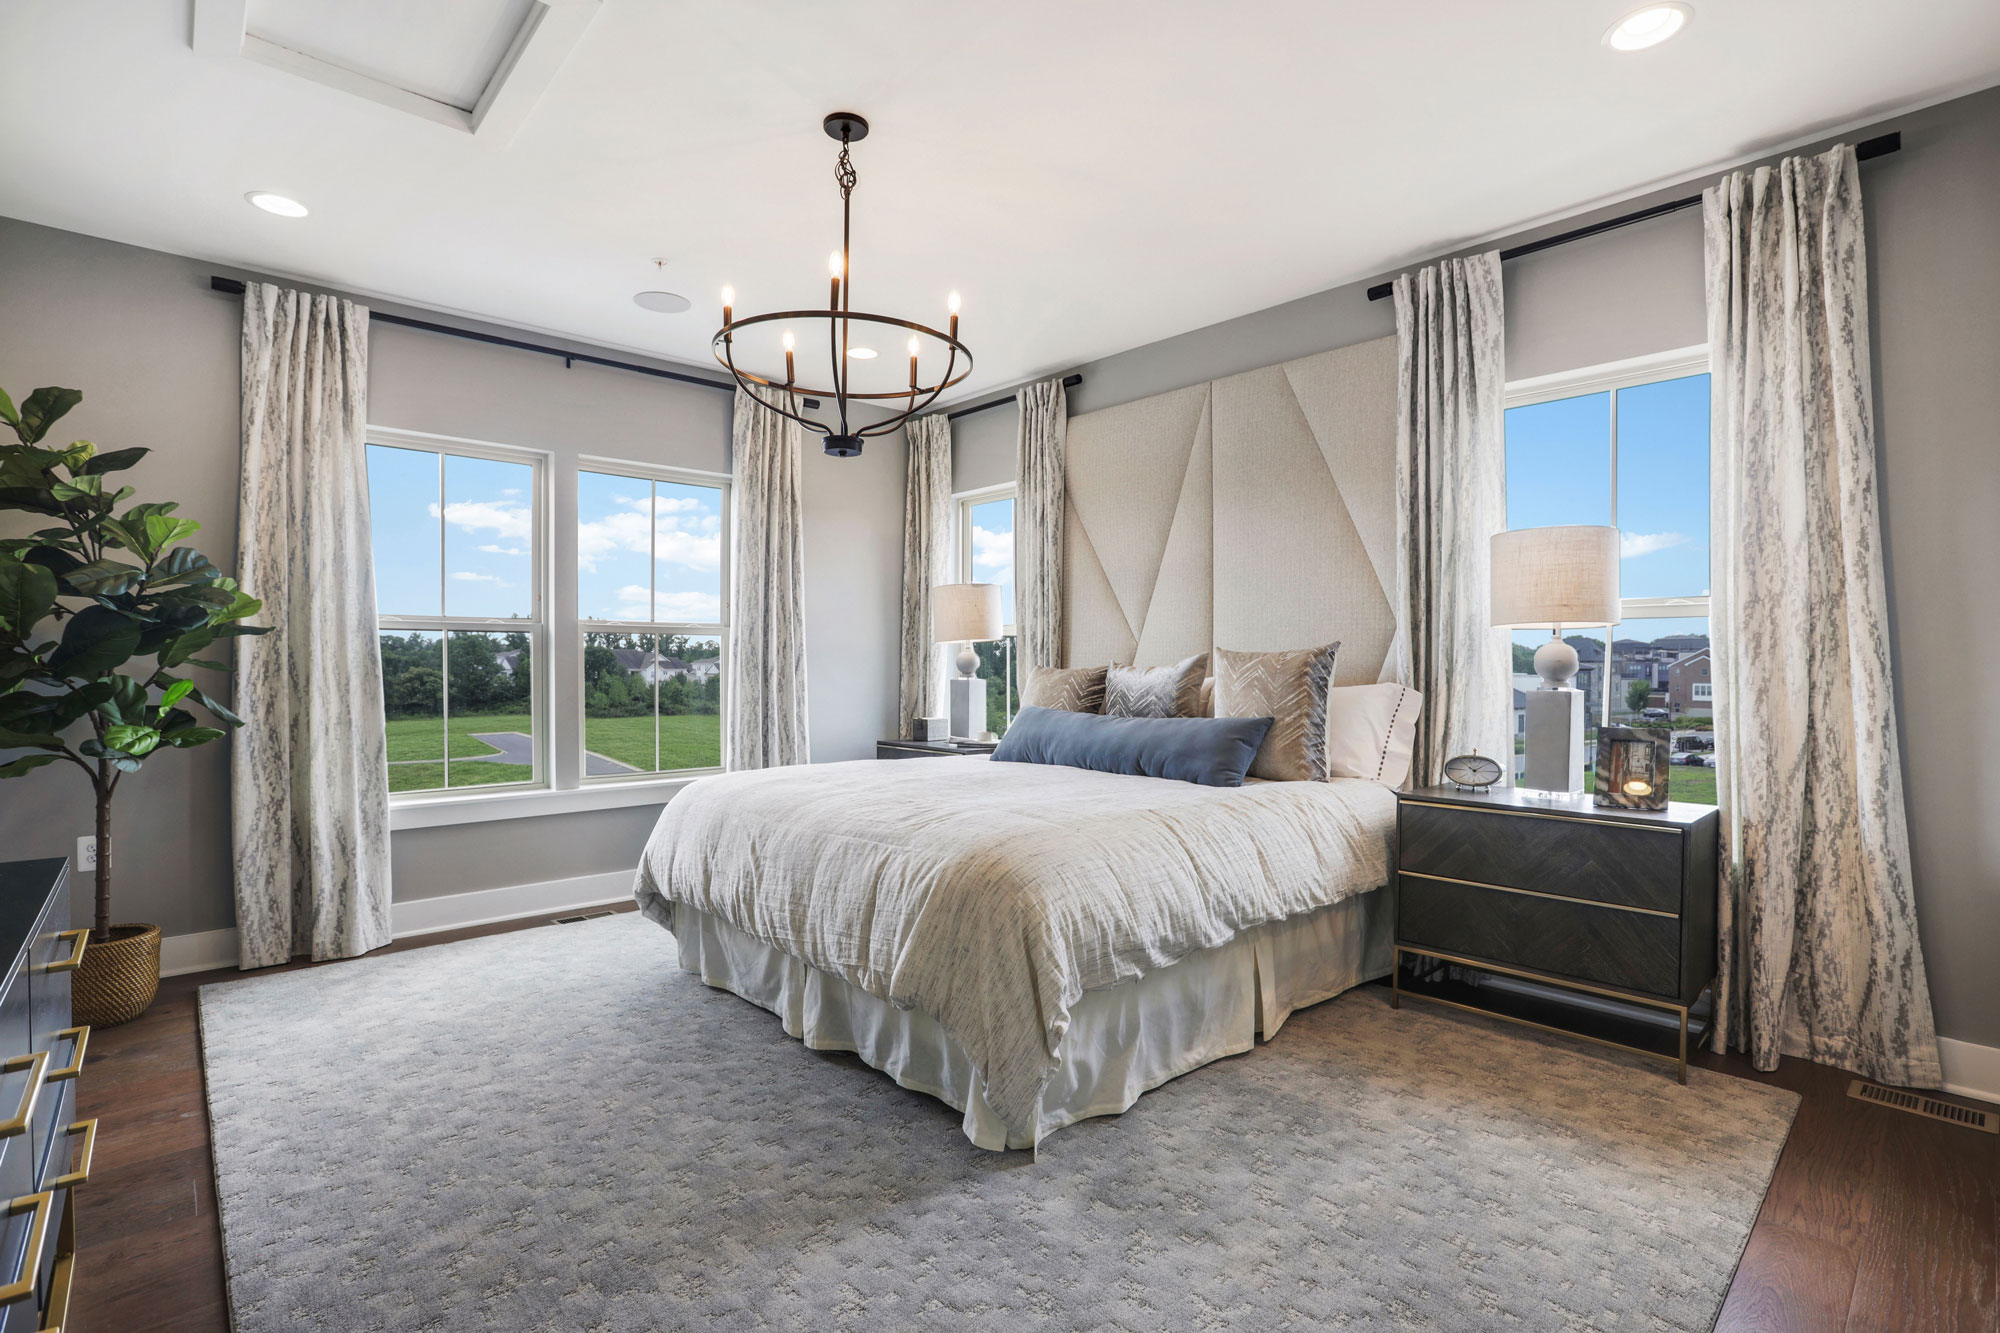 Bedrooms, Elevator Townhomes in Gaithersburg, MD, Crown by Craftmark Homes